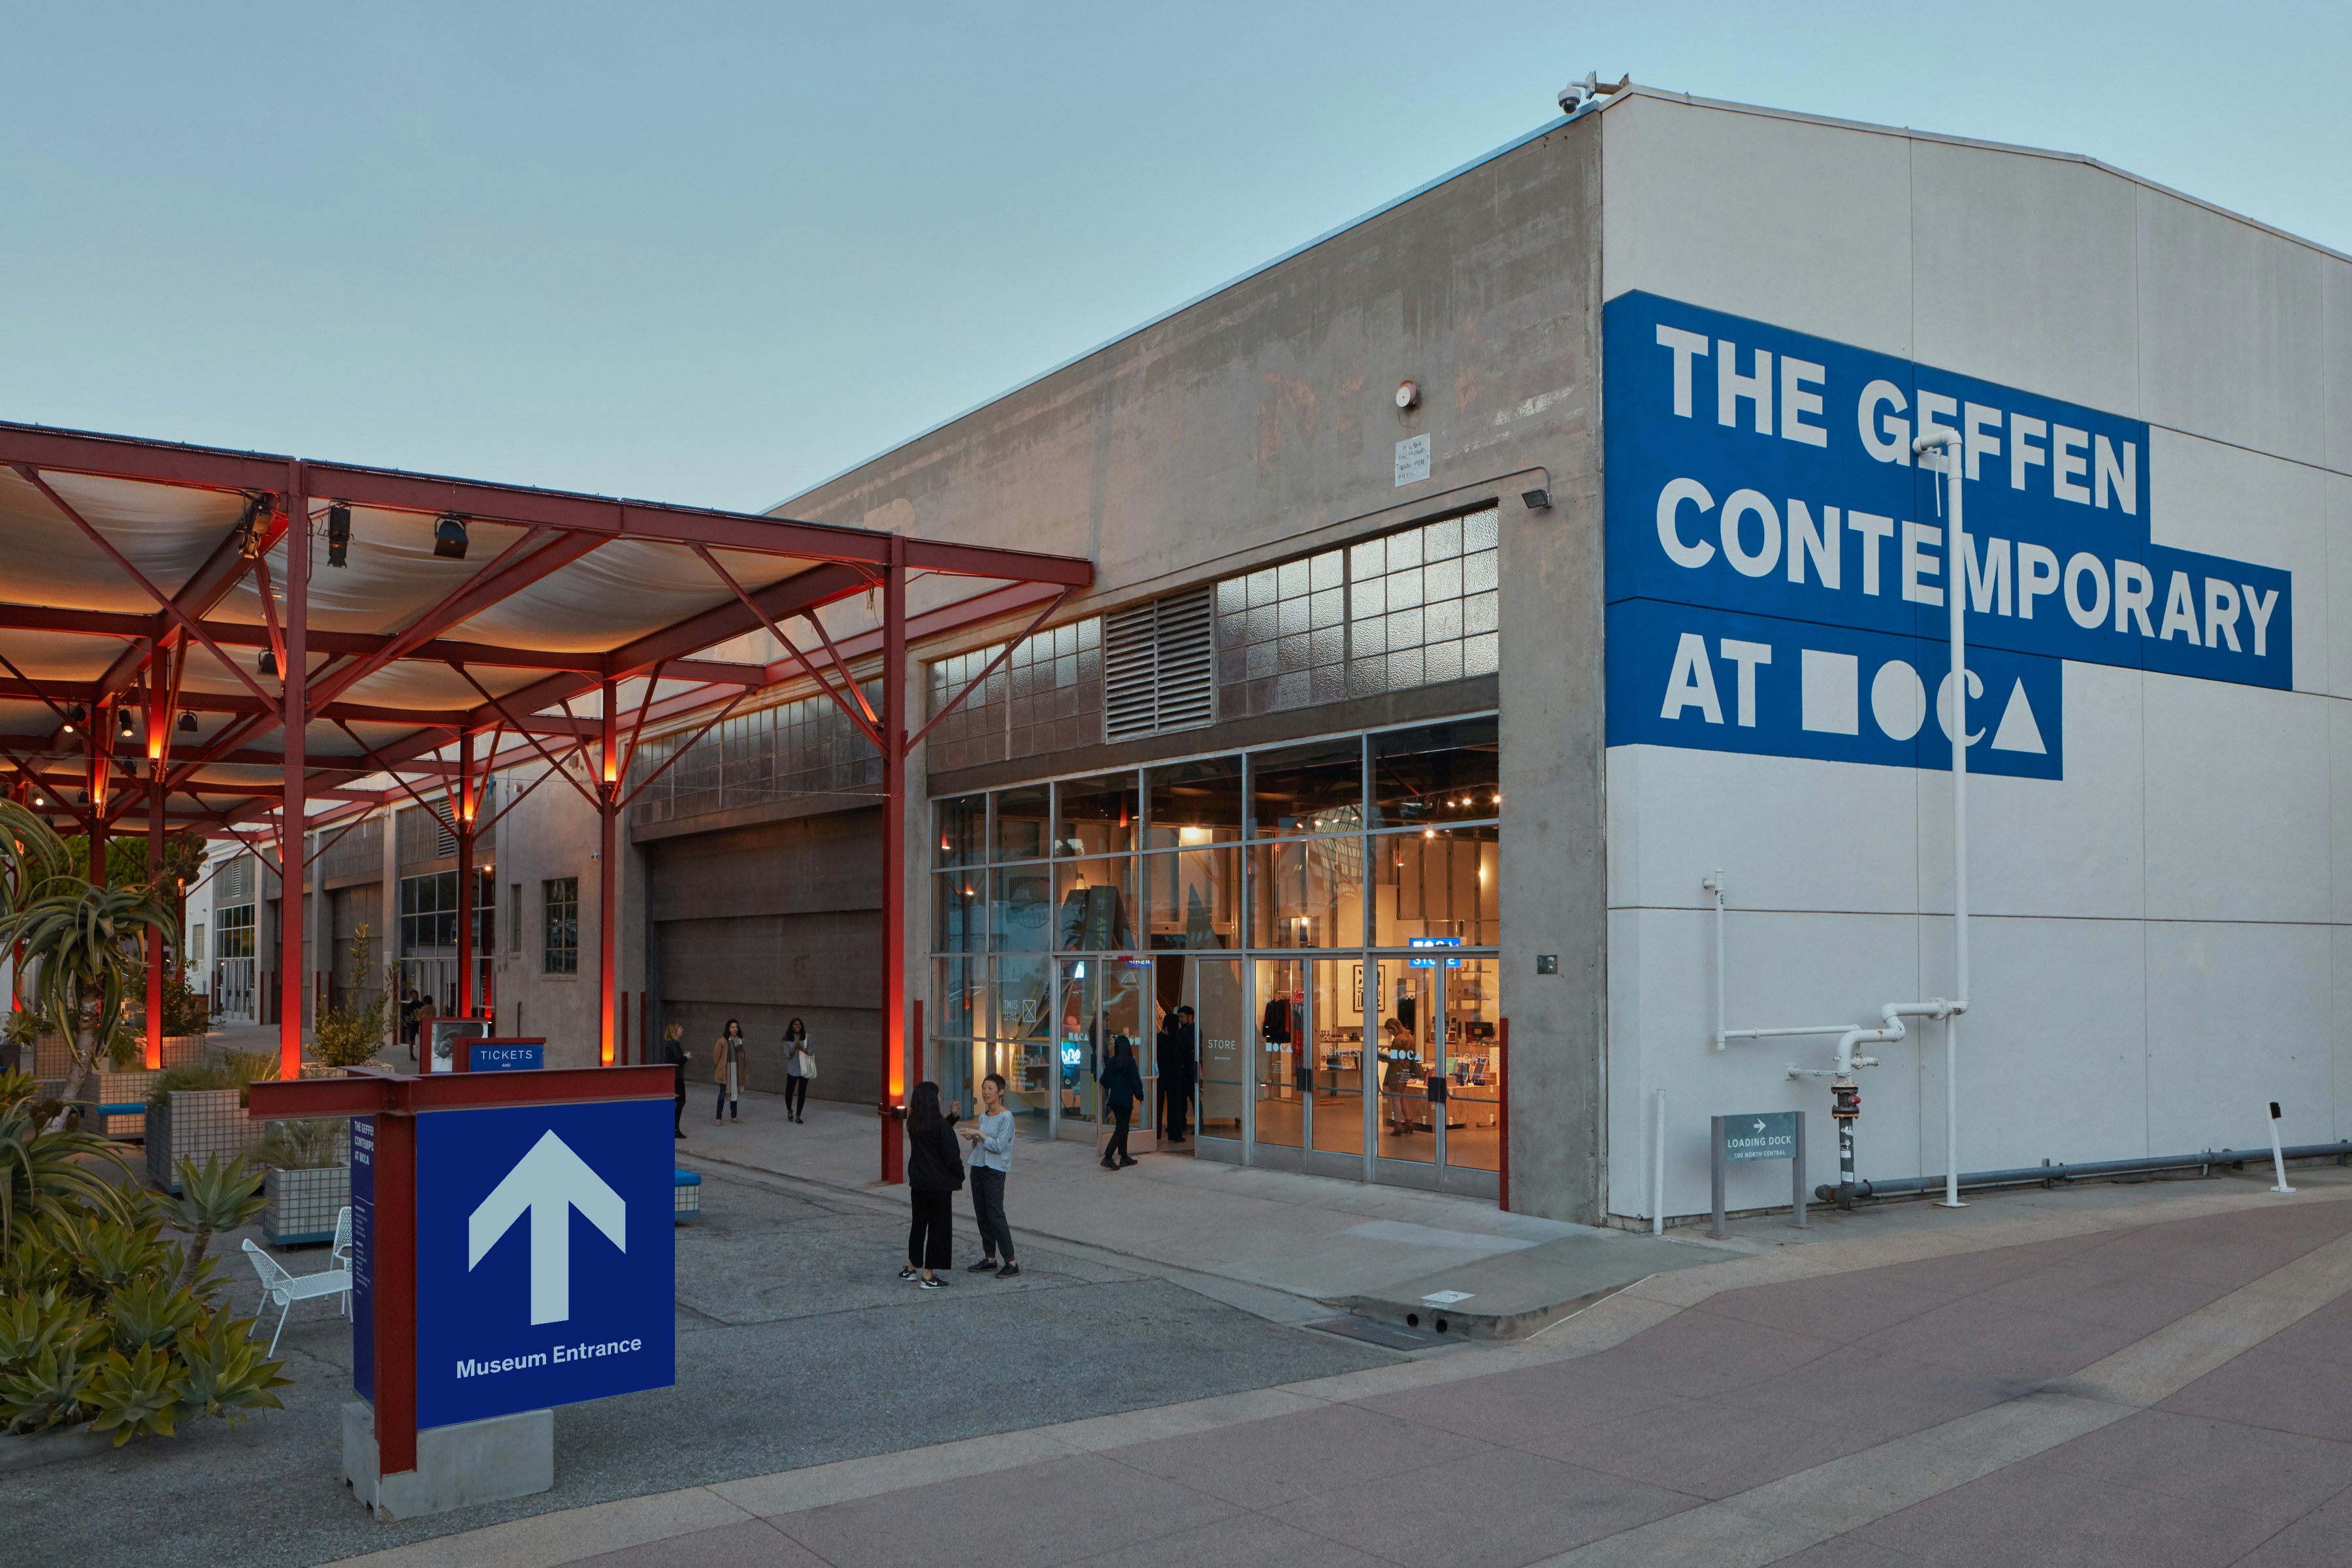 The Geffen Contemporary at MOCA. Photograph by Elon Schoenholz. Courtesy of The Museum of Contemporary Art, Los Angeles.